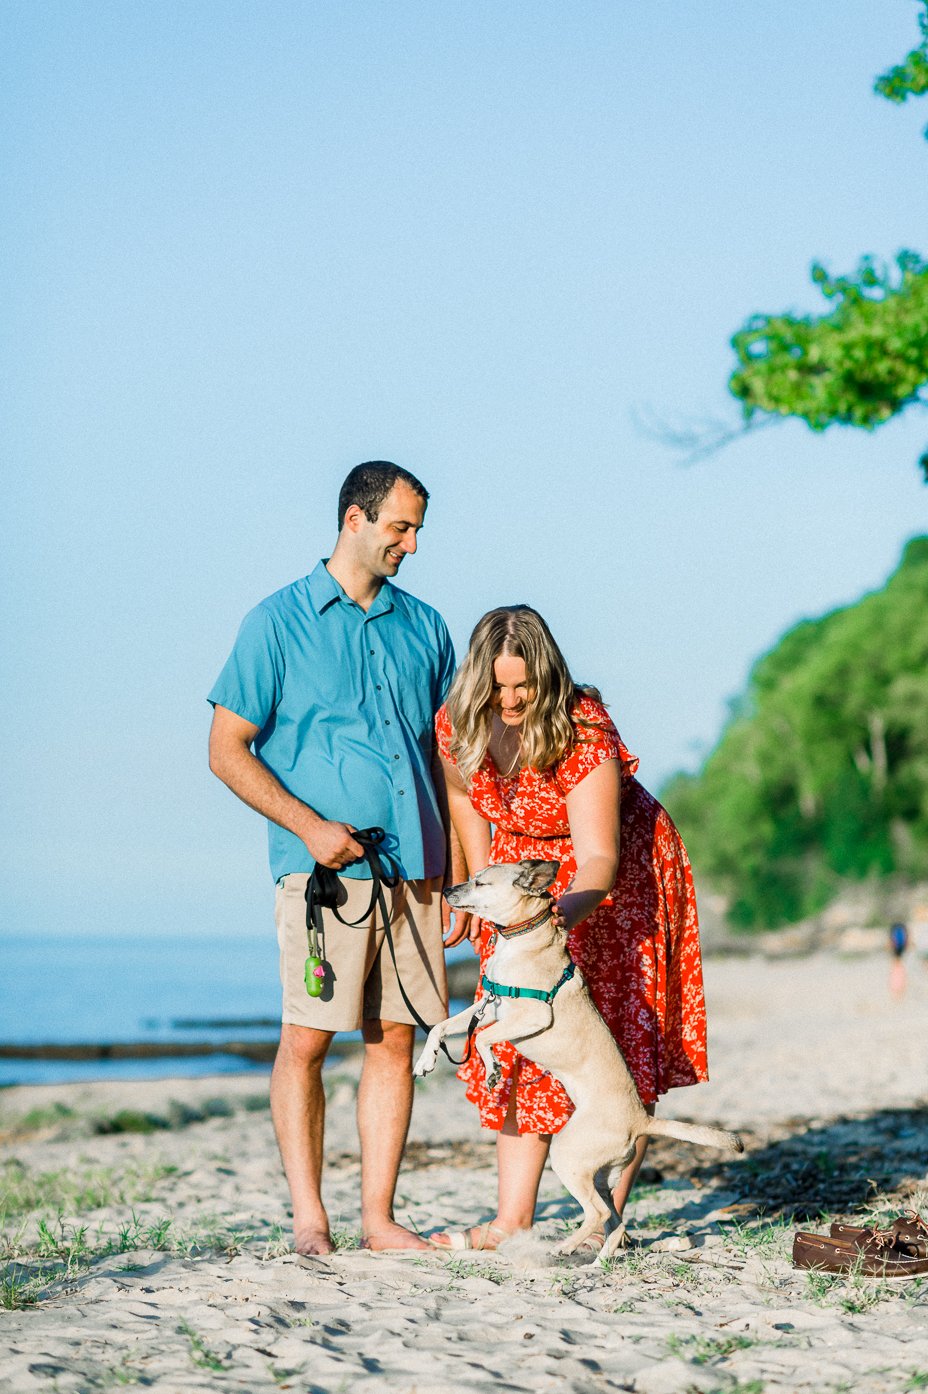 Engagement_Westmoreland_Summer_youseephotography_LeslieNick_blogpic00033a.jpg